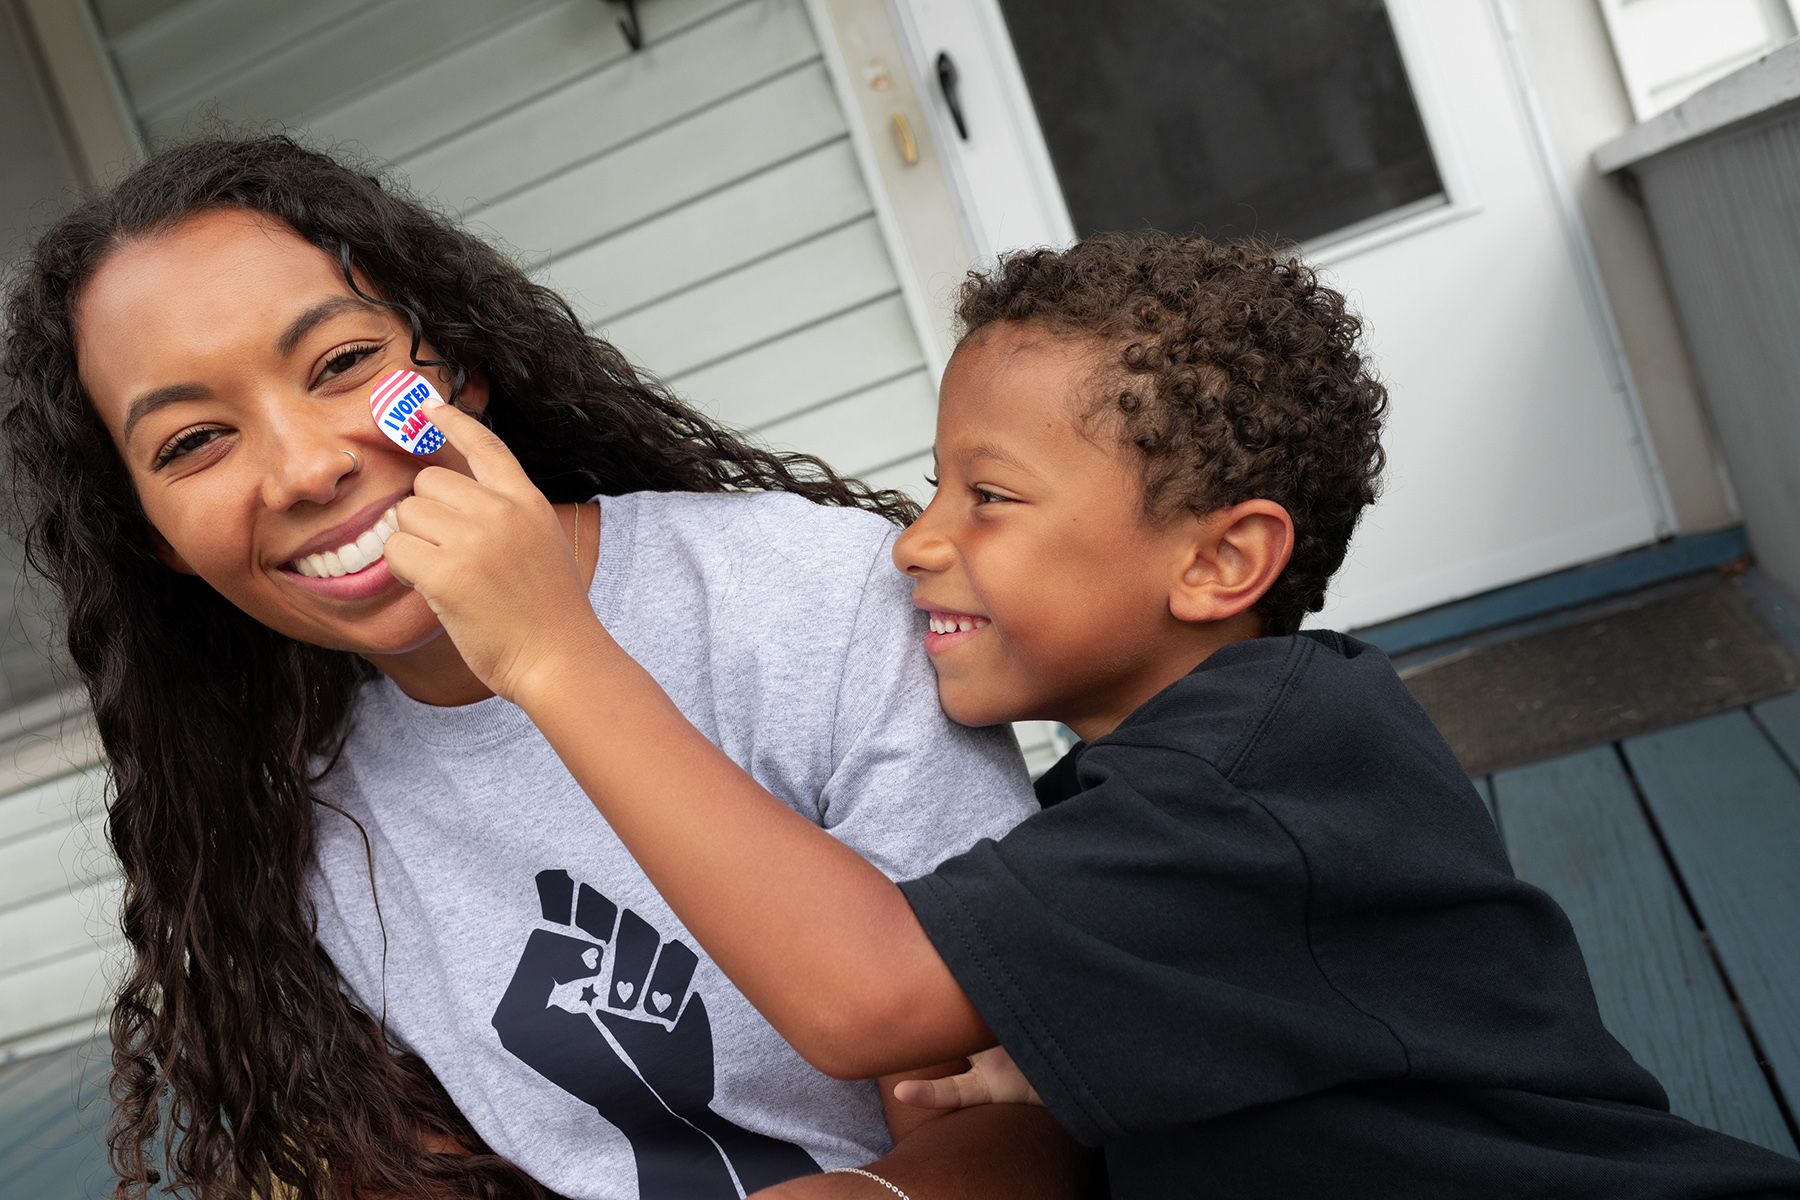 Smiling young boy placing a sticker on a smiling woman\'s cheek